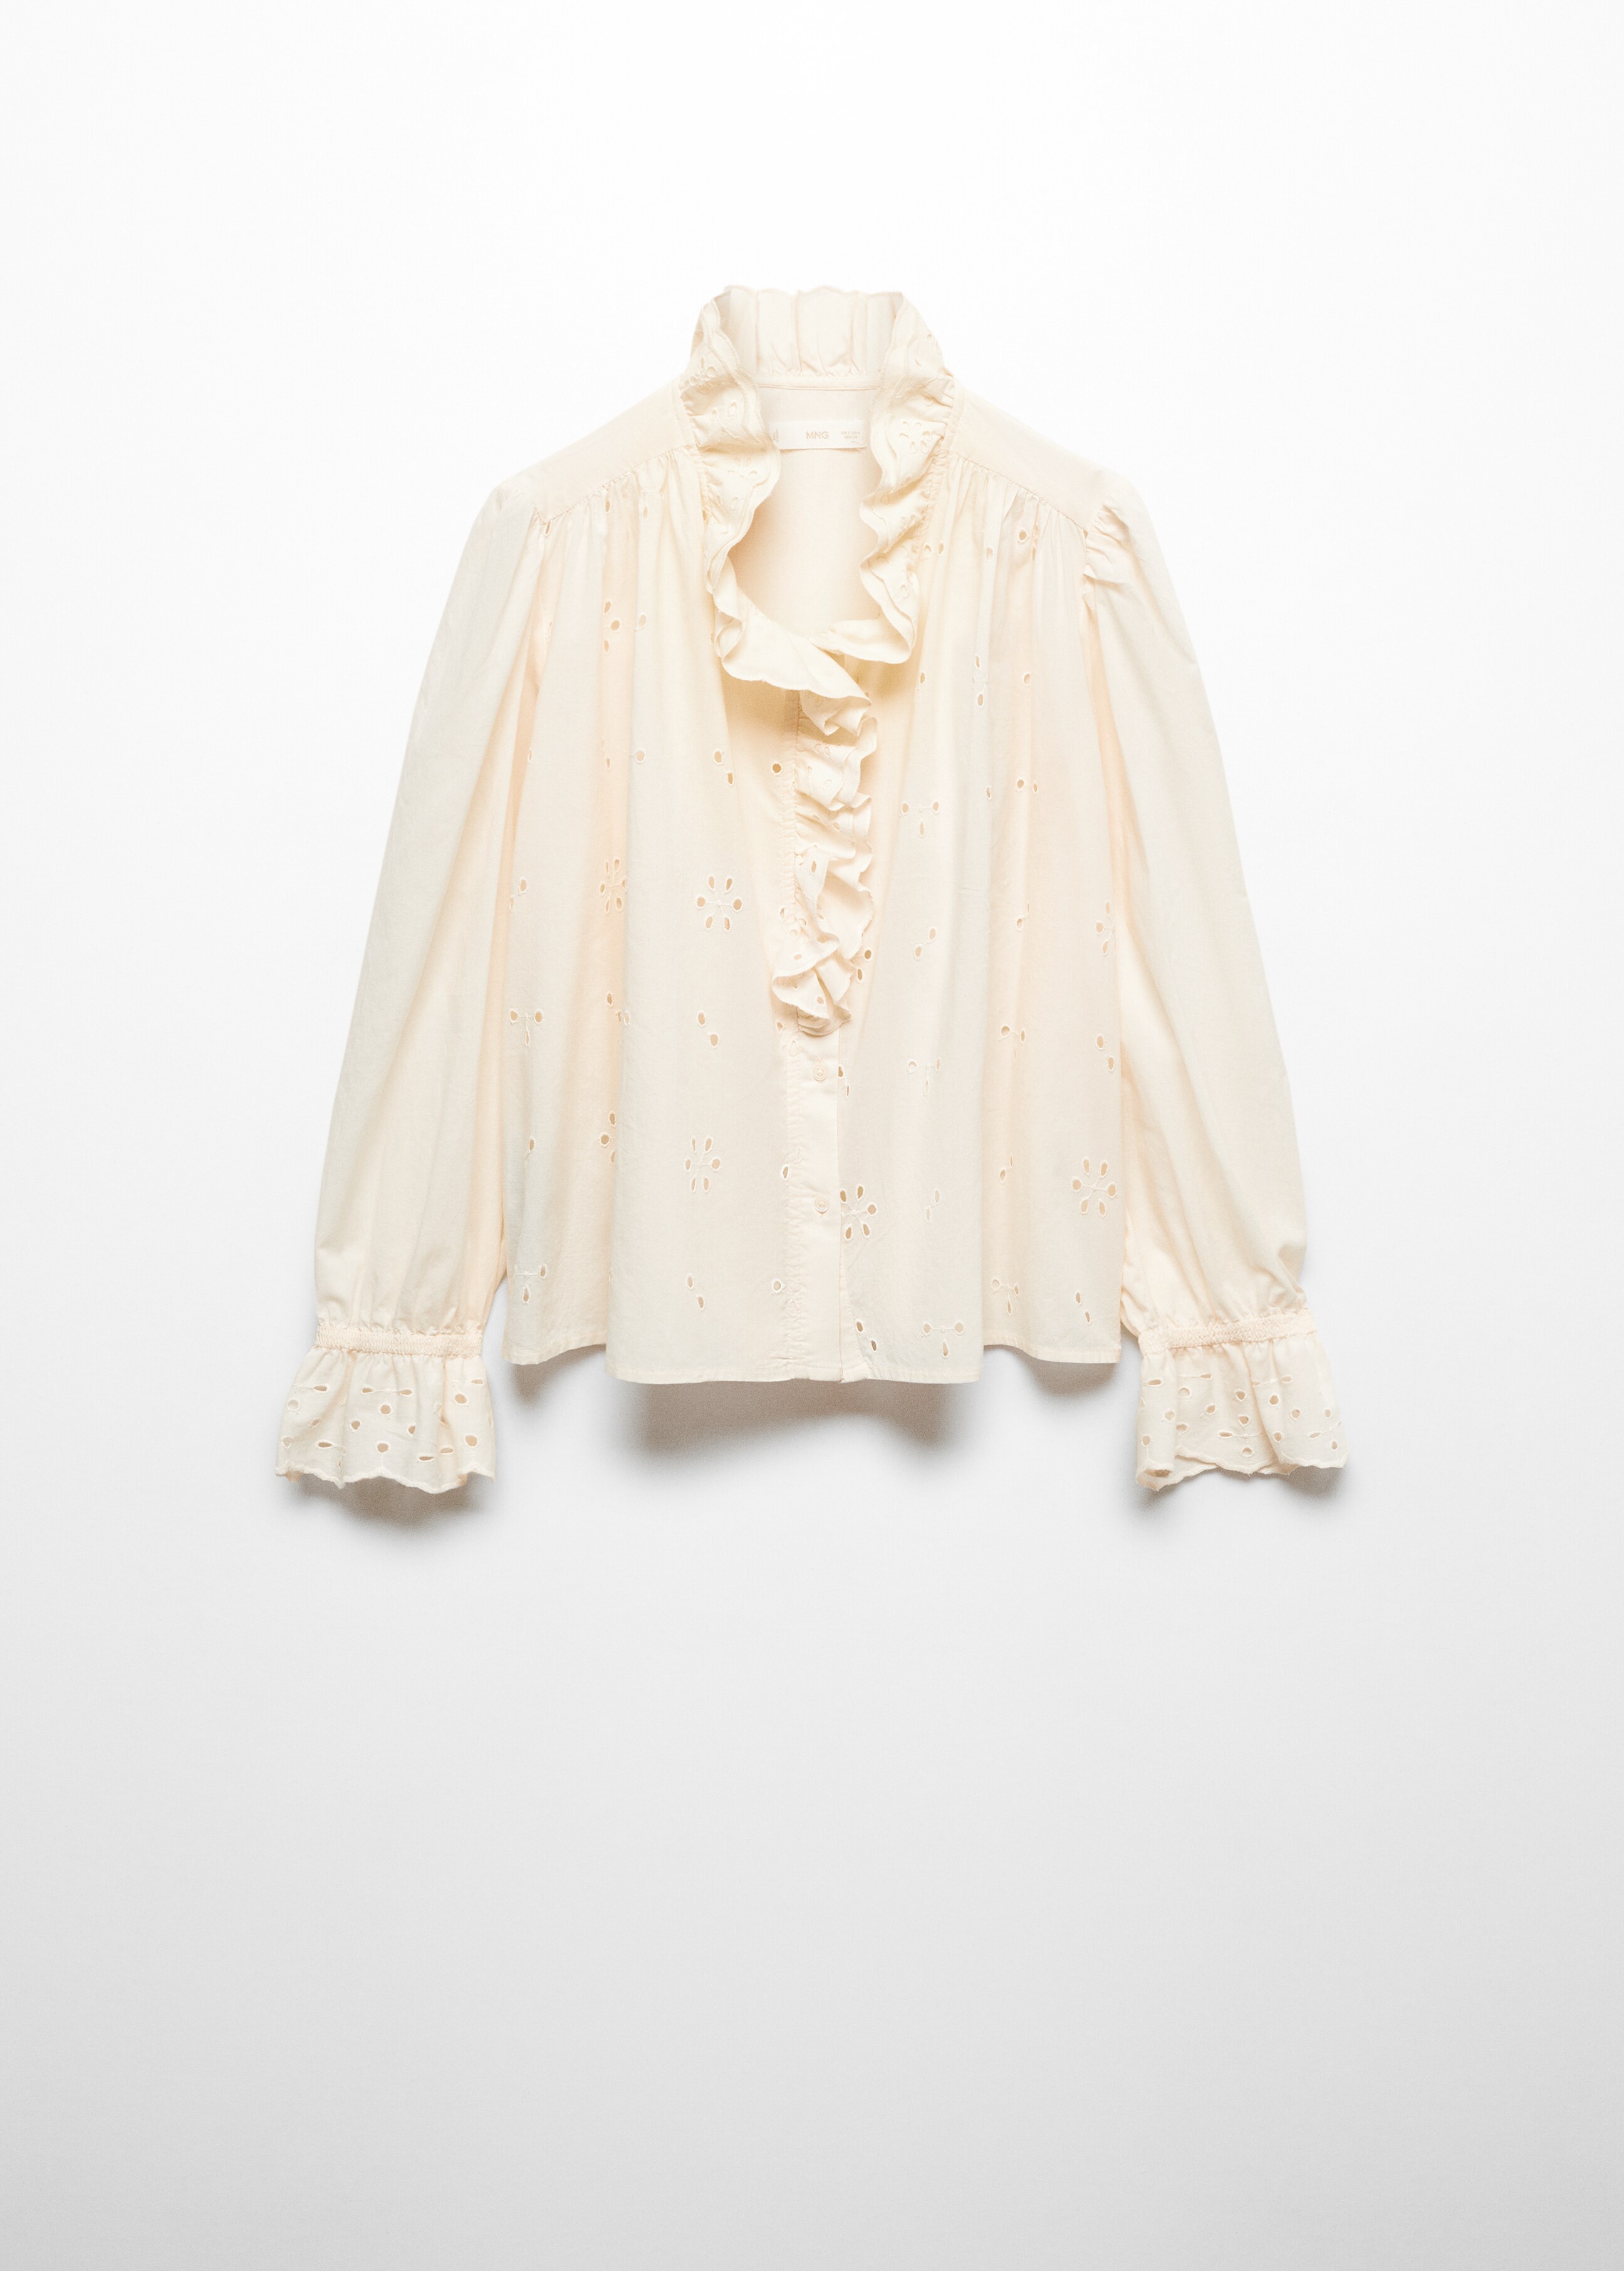 Openwork shirt with ruffle detail  - Article without model